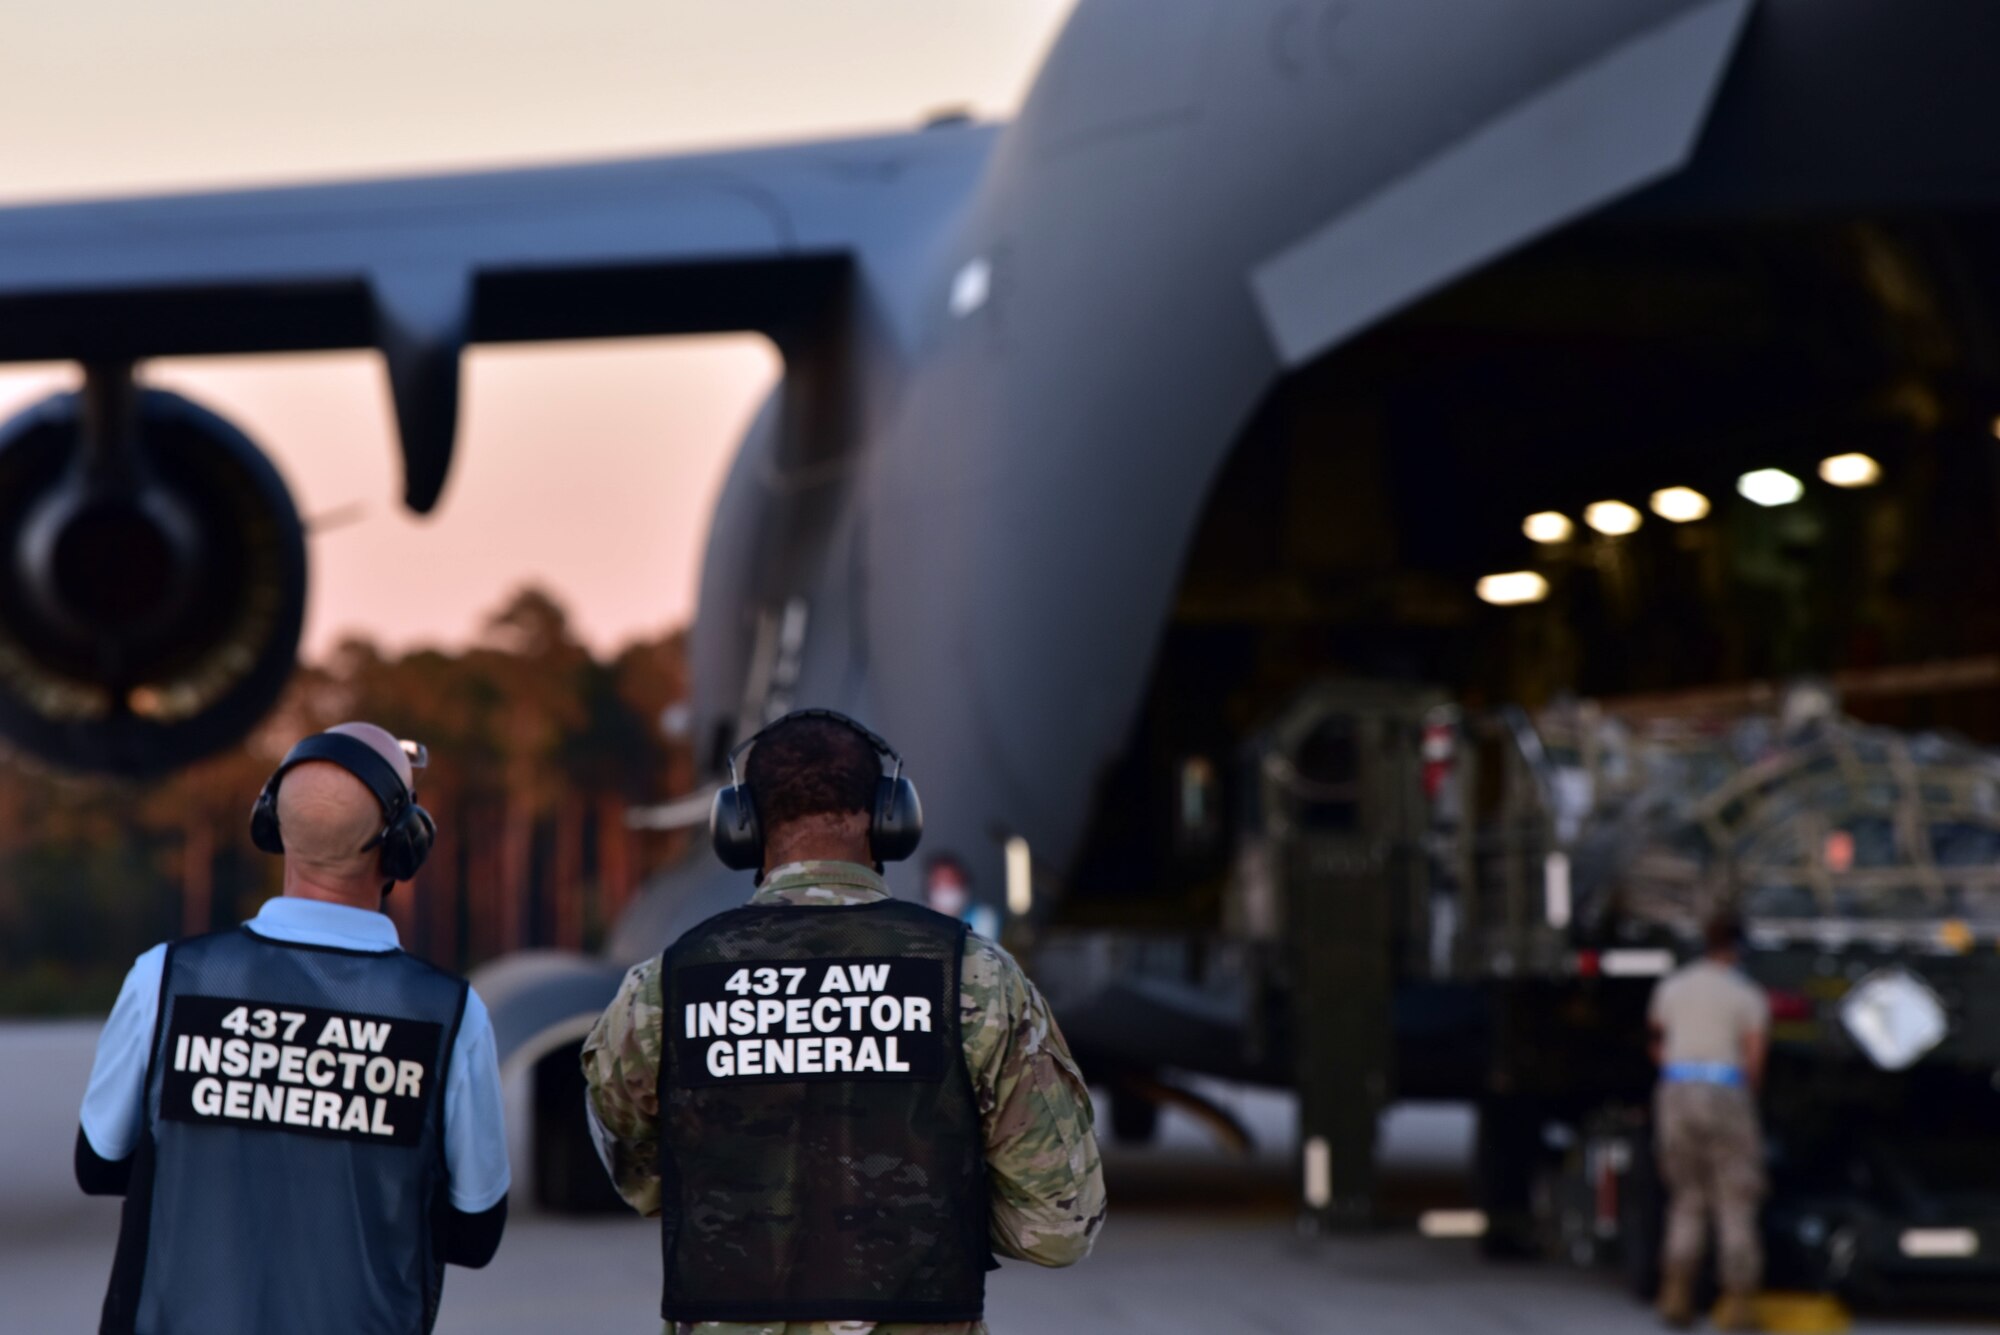 U.S. Air Force Master Sgt. Bradley Moorer, an Inspector General Wing Inspection Team superintendent for the 437th Airlift Wing (left), and Mark Vickers, the 437th AW IG director of inspections (right), watch as a C-17 Globemaster III containing Airmen and supplies lands, at McEntire Joint National Guard Base, S.C., Nov. 16, 2020. Palmetto Challenge is a global mobilization exercise held at McEntire Joint National Guard Base, S.C., and Pope Army Airfield, N.C. The exercise is held in order to develop readiness and awareness in a simulated deployed environment for over 100 Airmen from Joint Base Charleston.